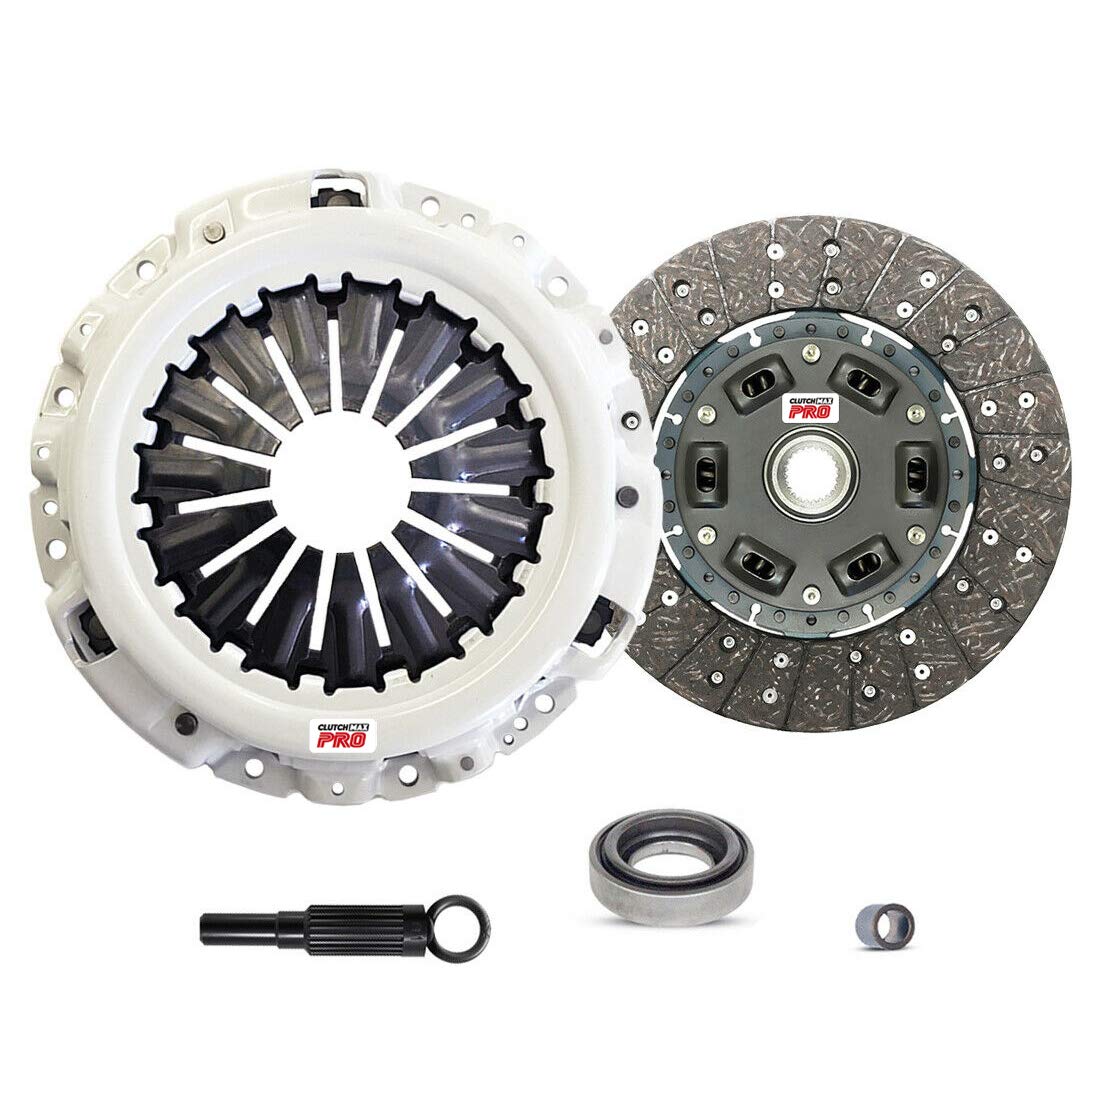 Infinity G35 Clutch Replacement: Cost and Considerations